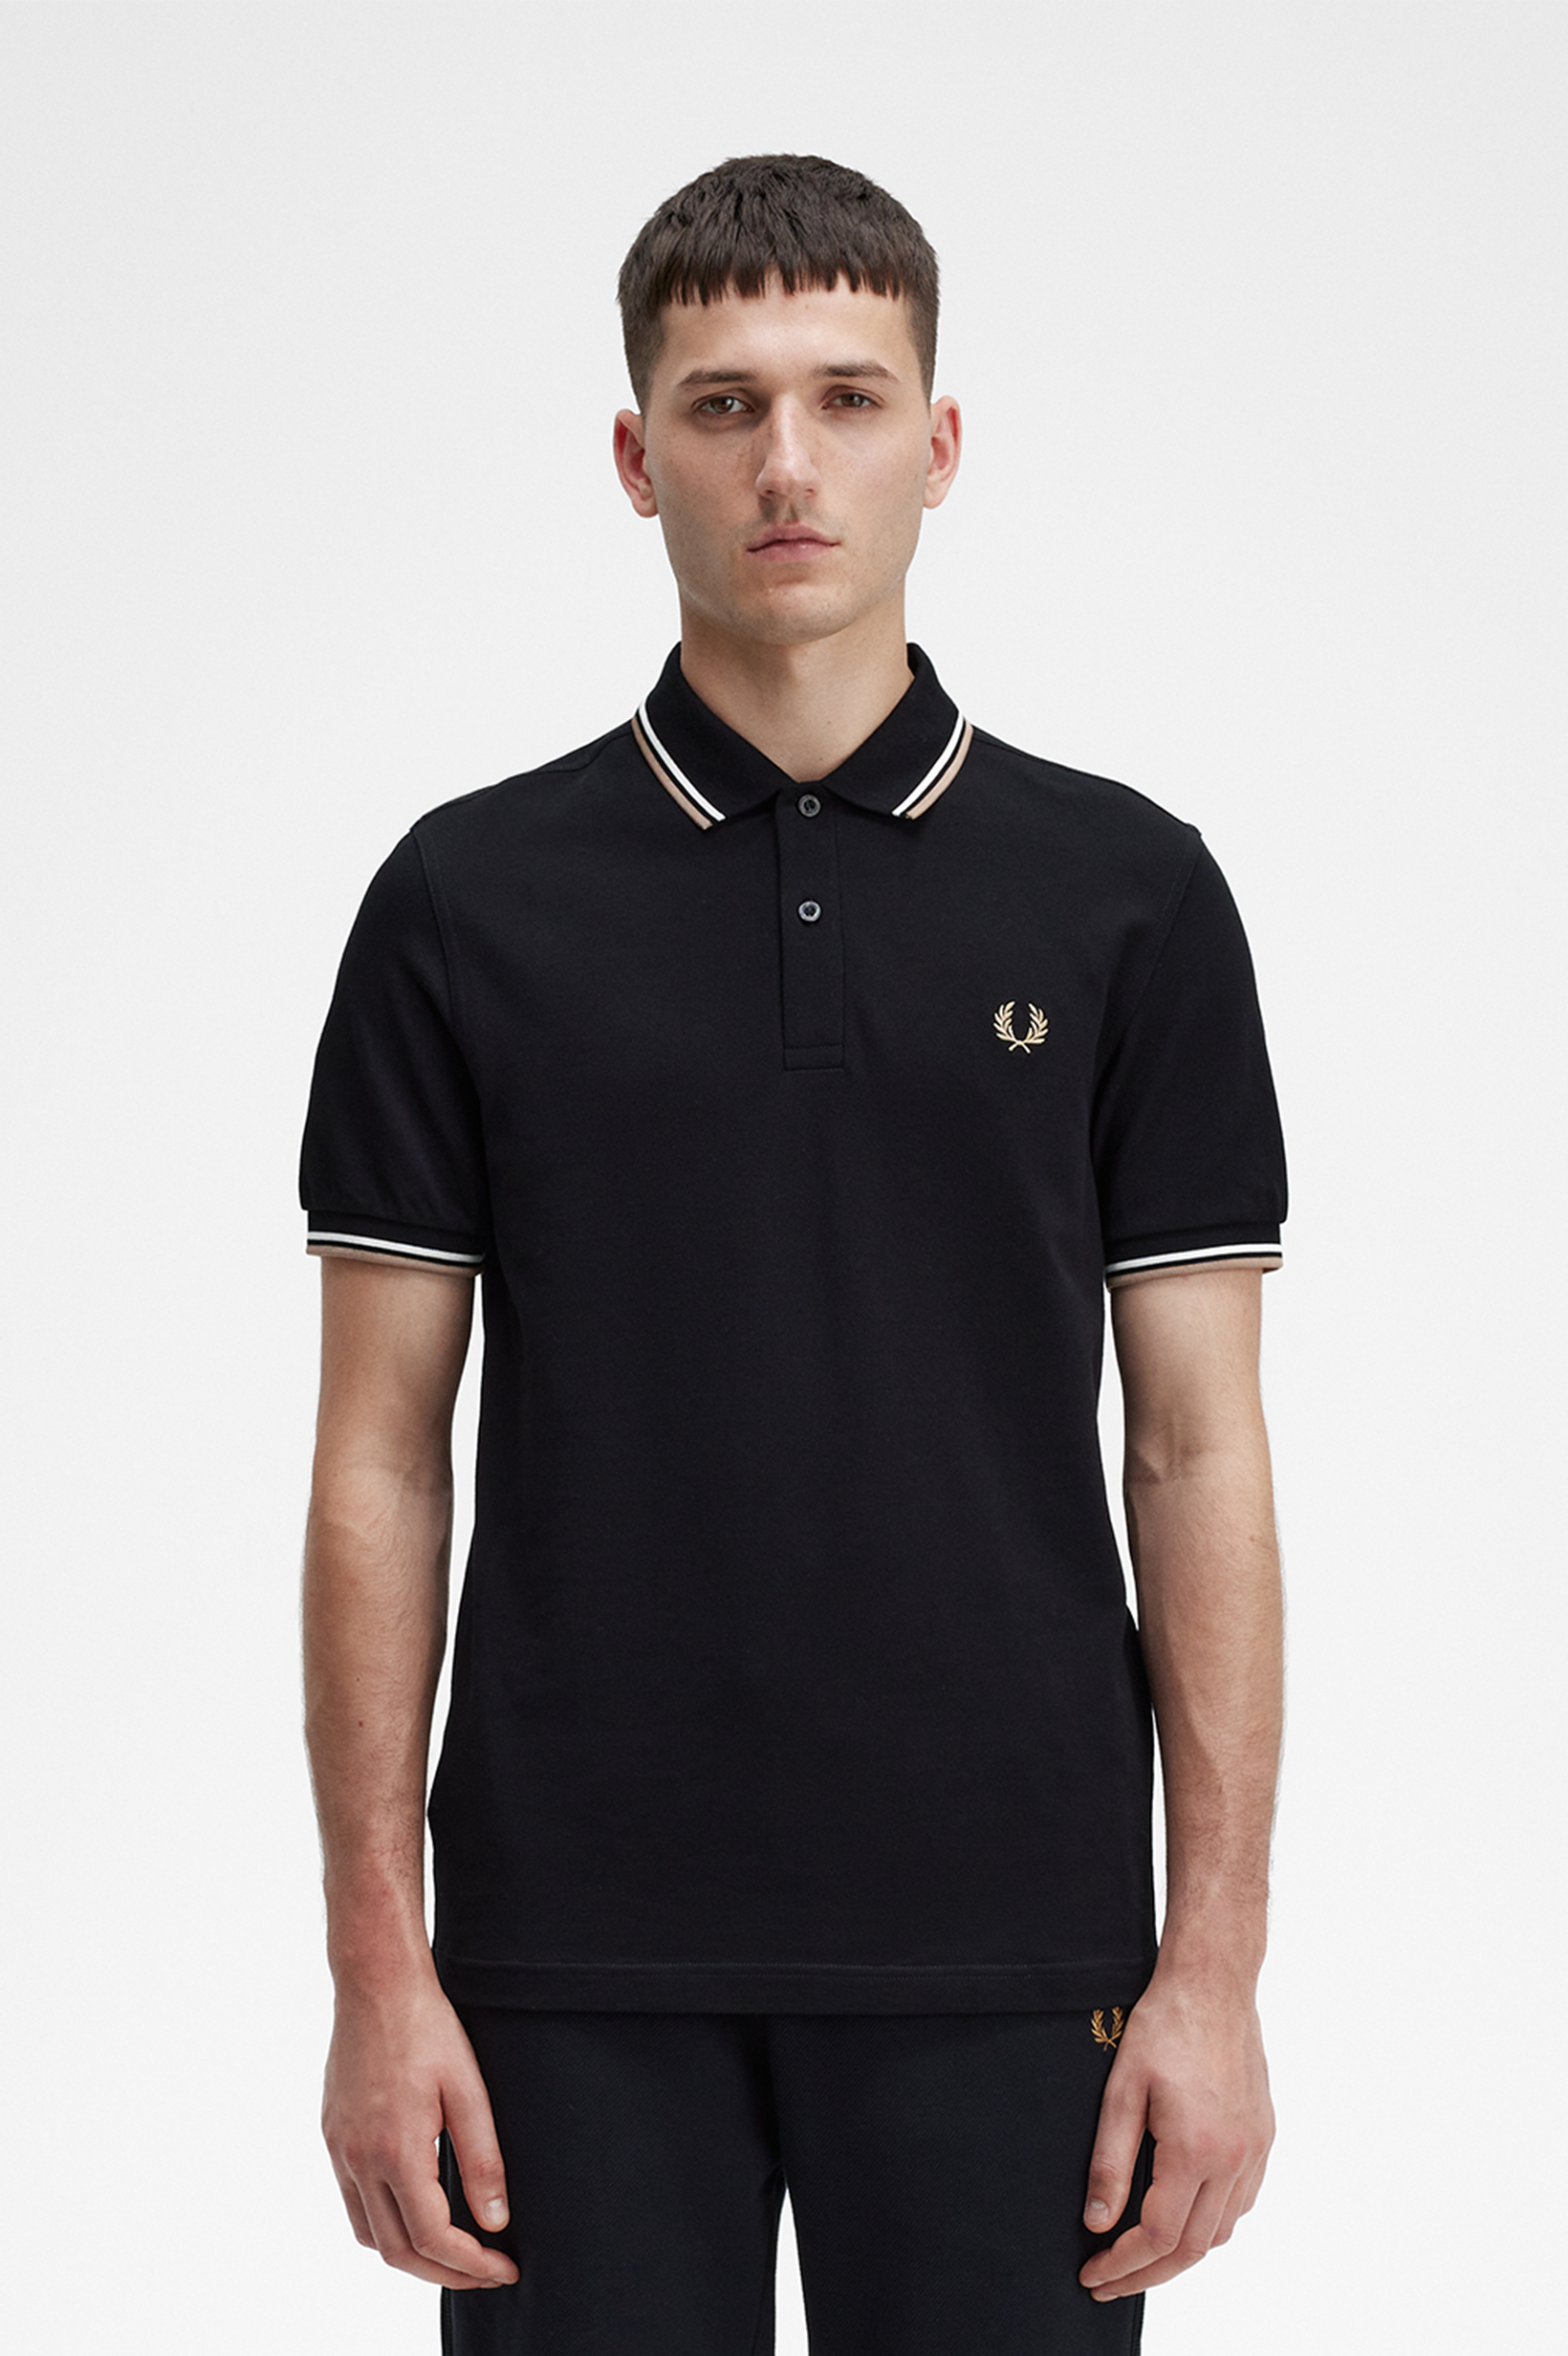 Fred Perry - TWIN TIPPED POLO SHIRT - Black/Snow White/Warm Stone